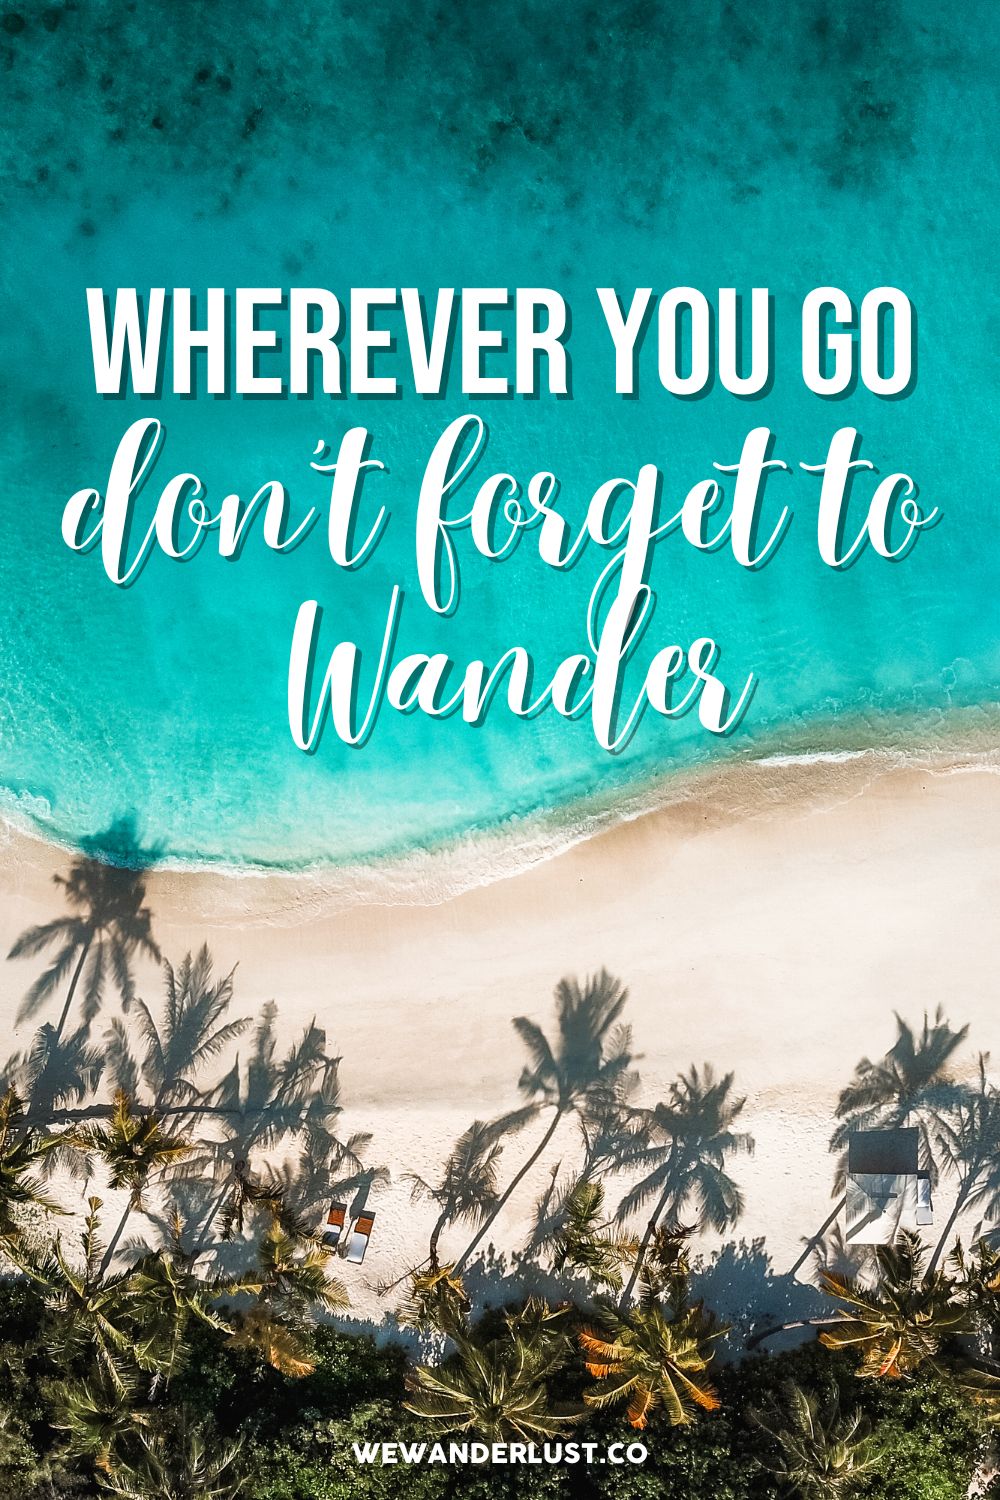  The 62 Best Travel Quotes to Spark Your Wanderlust